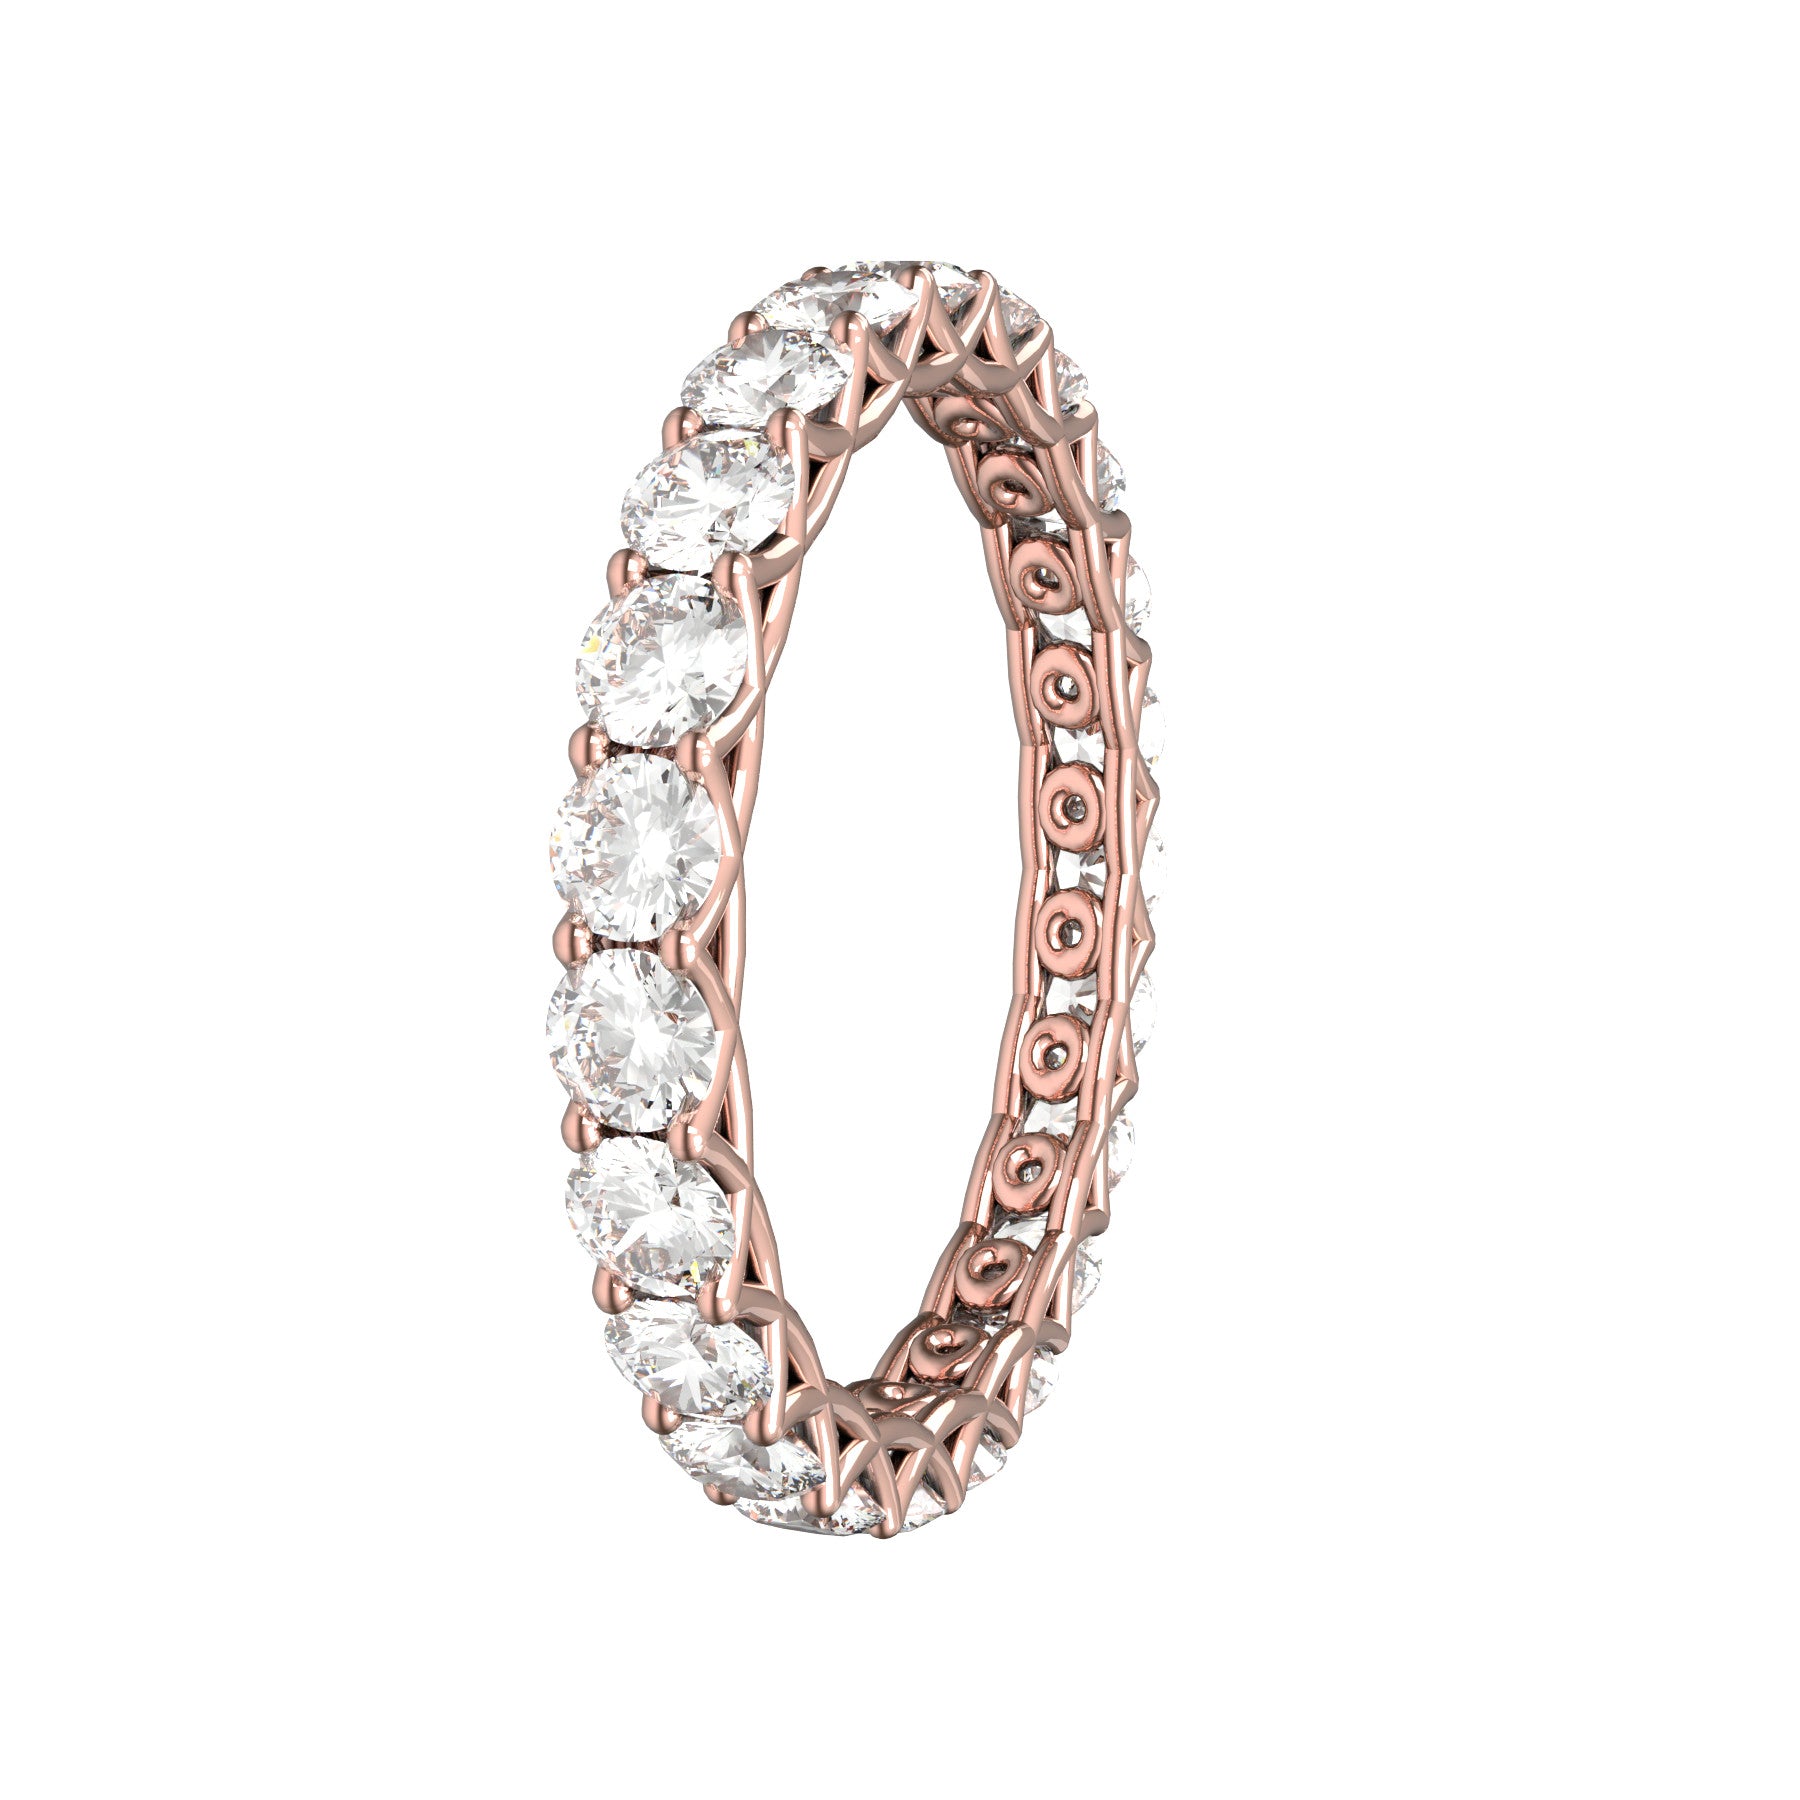 sweet hearts wedding band, 18 K pink gold, 0,07 natural diamonds, weight about 1,50 g. (0.05 oz), width 2,65 mm